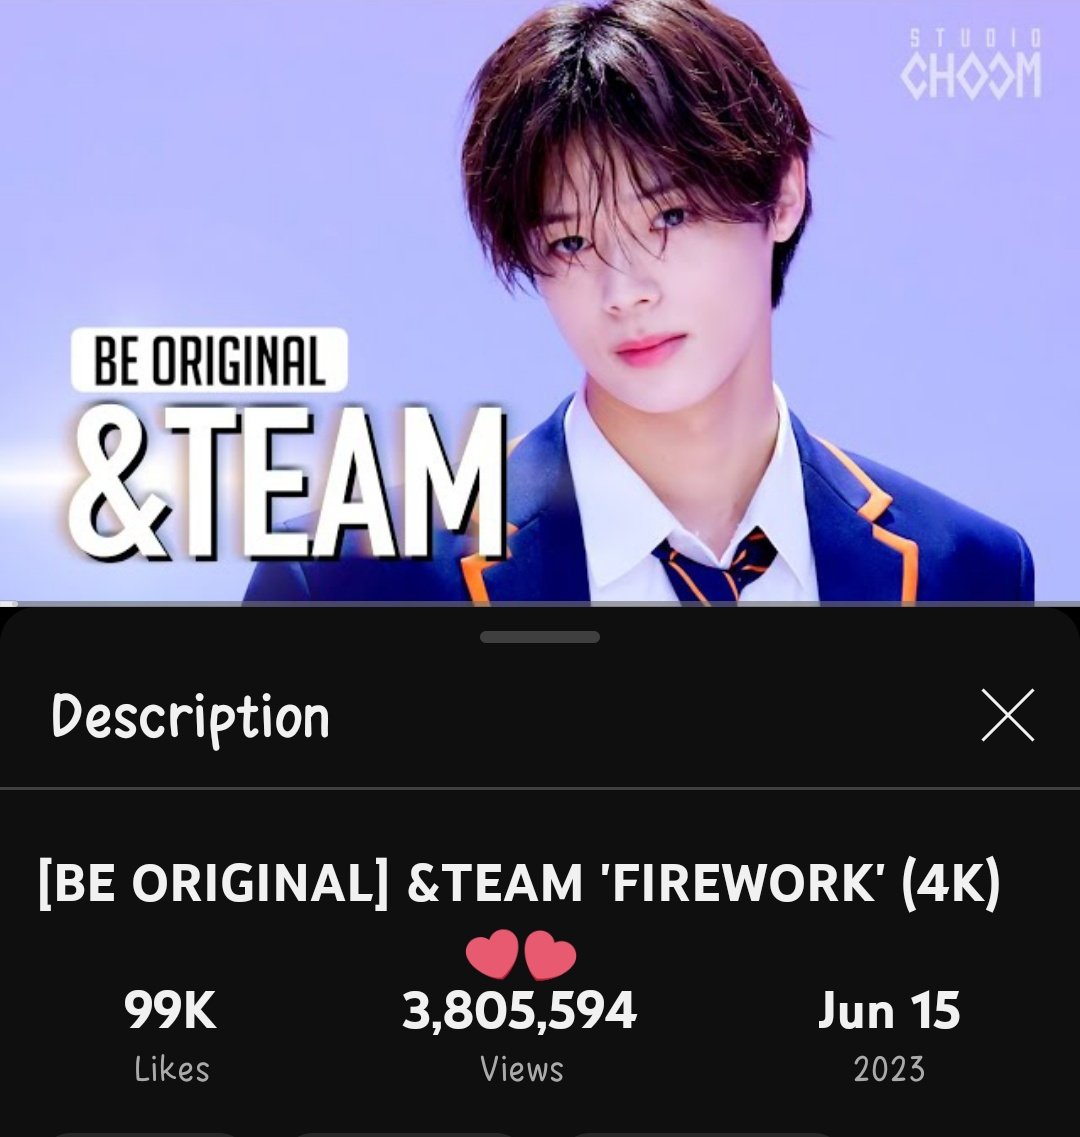 INFO 04/27/24] <04:26M JST>

&TEAM “FIREWORK” Studio Choom Performance has now surpassed 3.8M views on YouTube. 

🔗: youtu.be/xKkb8fi-CD4

#FIREWORK #andTEAM #FirstHowling_WE @andTEAMofficial